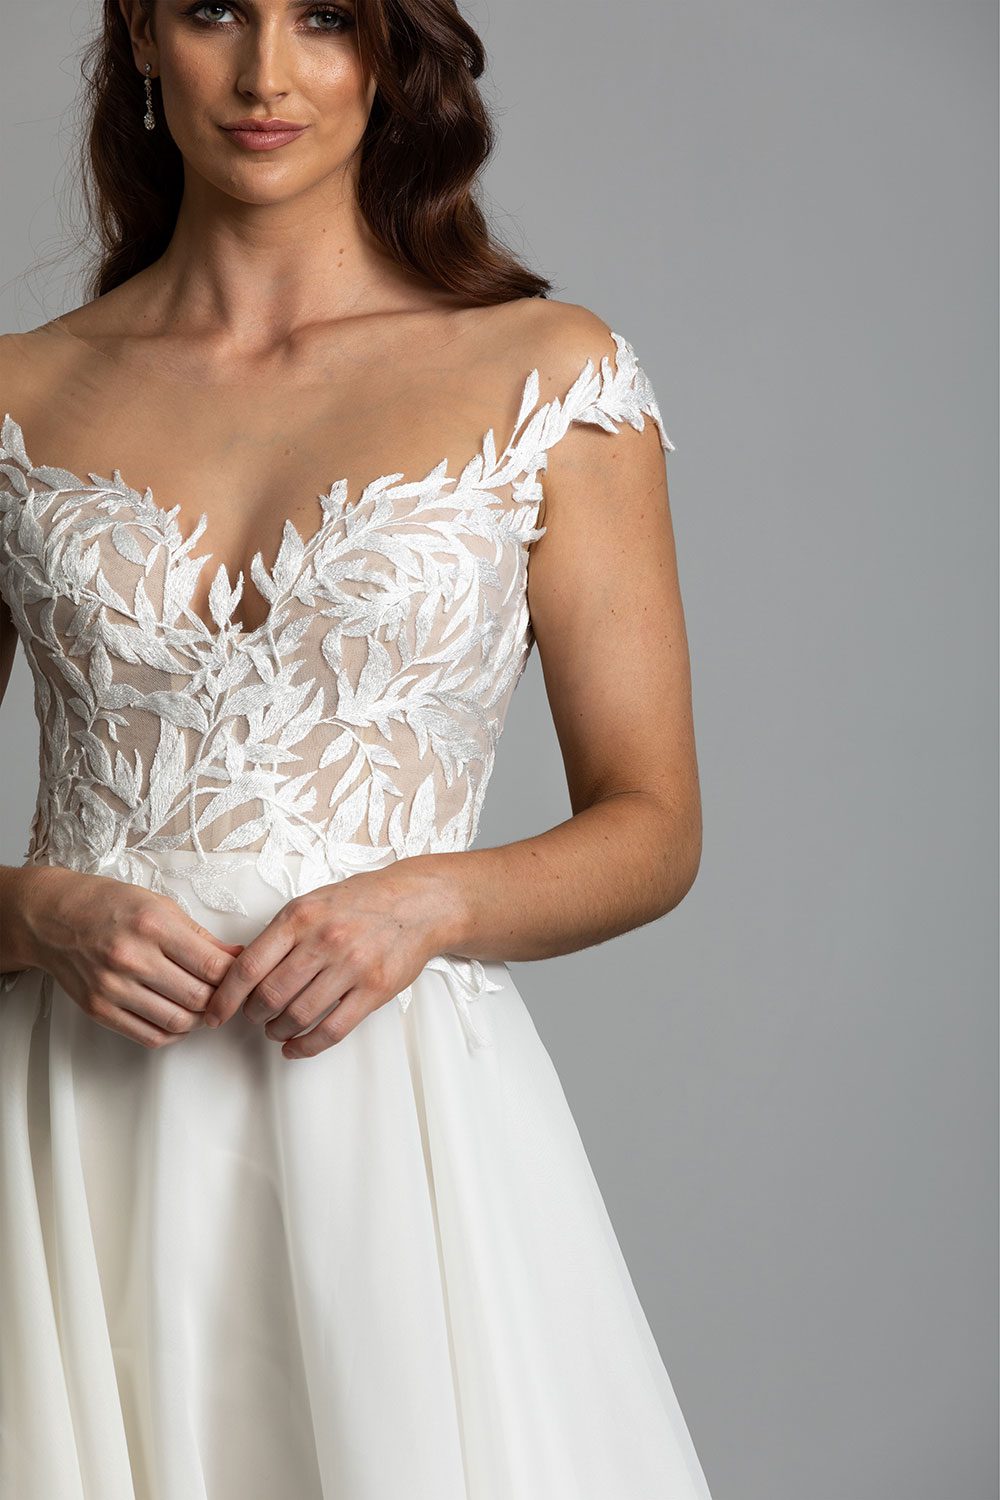 Ariana Wedding gown from Vinka Design - This gorgeous gown features delicate leaf lace hand-appliqued throughout the semi-sheer, structured bodice and up over the shoulder and skirt made of dreamy satin organza layers. Close up of model displaying semi-sheer bodice with off shoulder ivy lace details